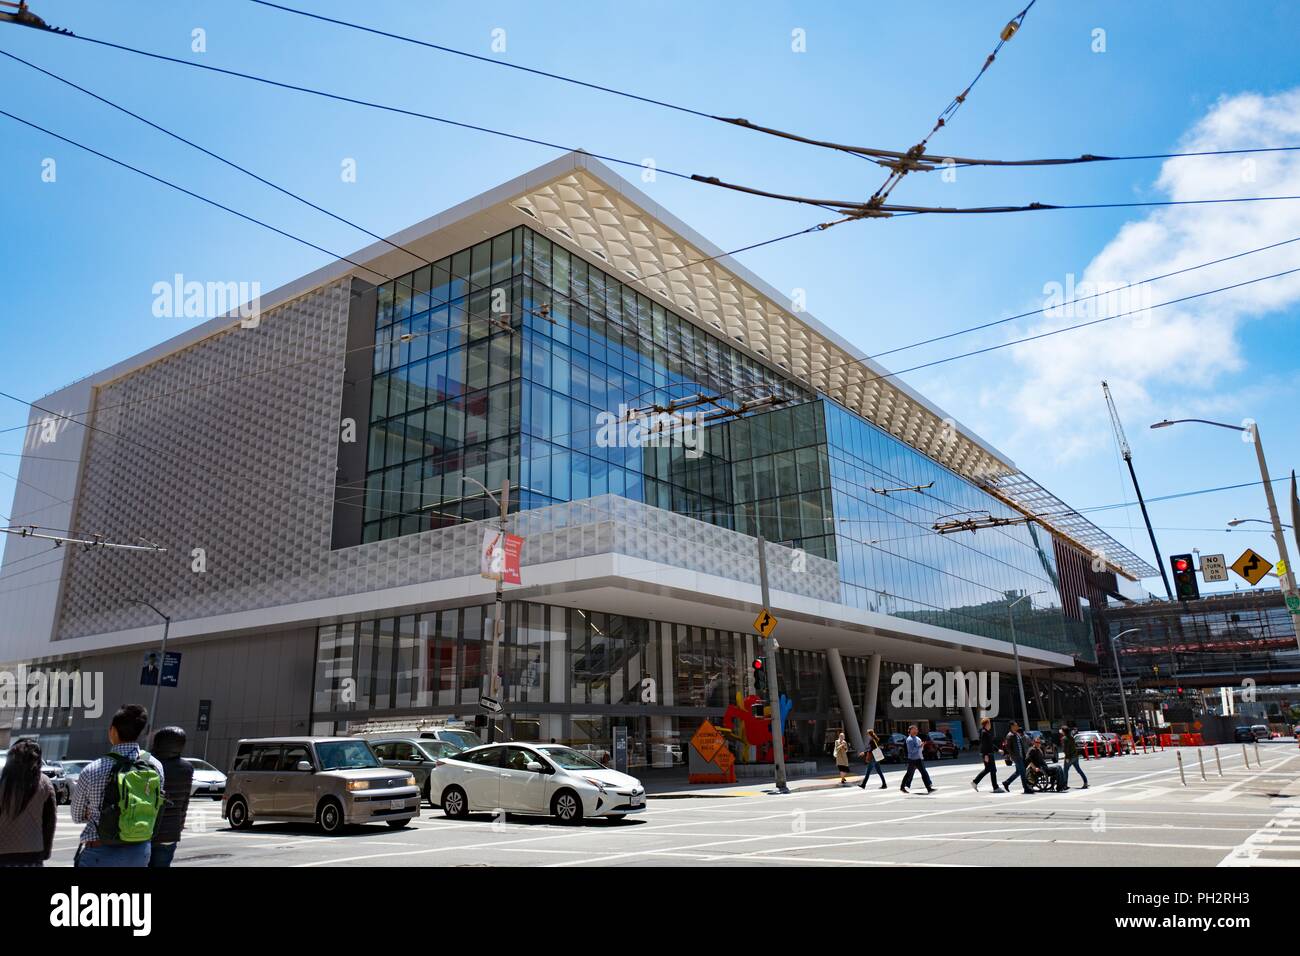 Facade of the Moscone Center convention center in downtown San Francisco, California during its 2018 renovation, August 2, 2018. () Stock Photo